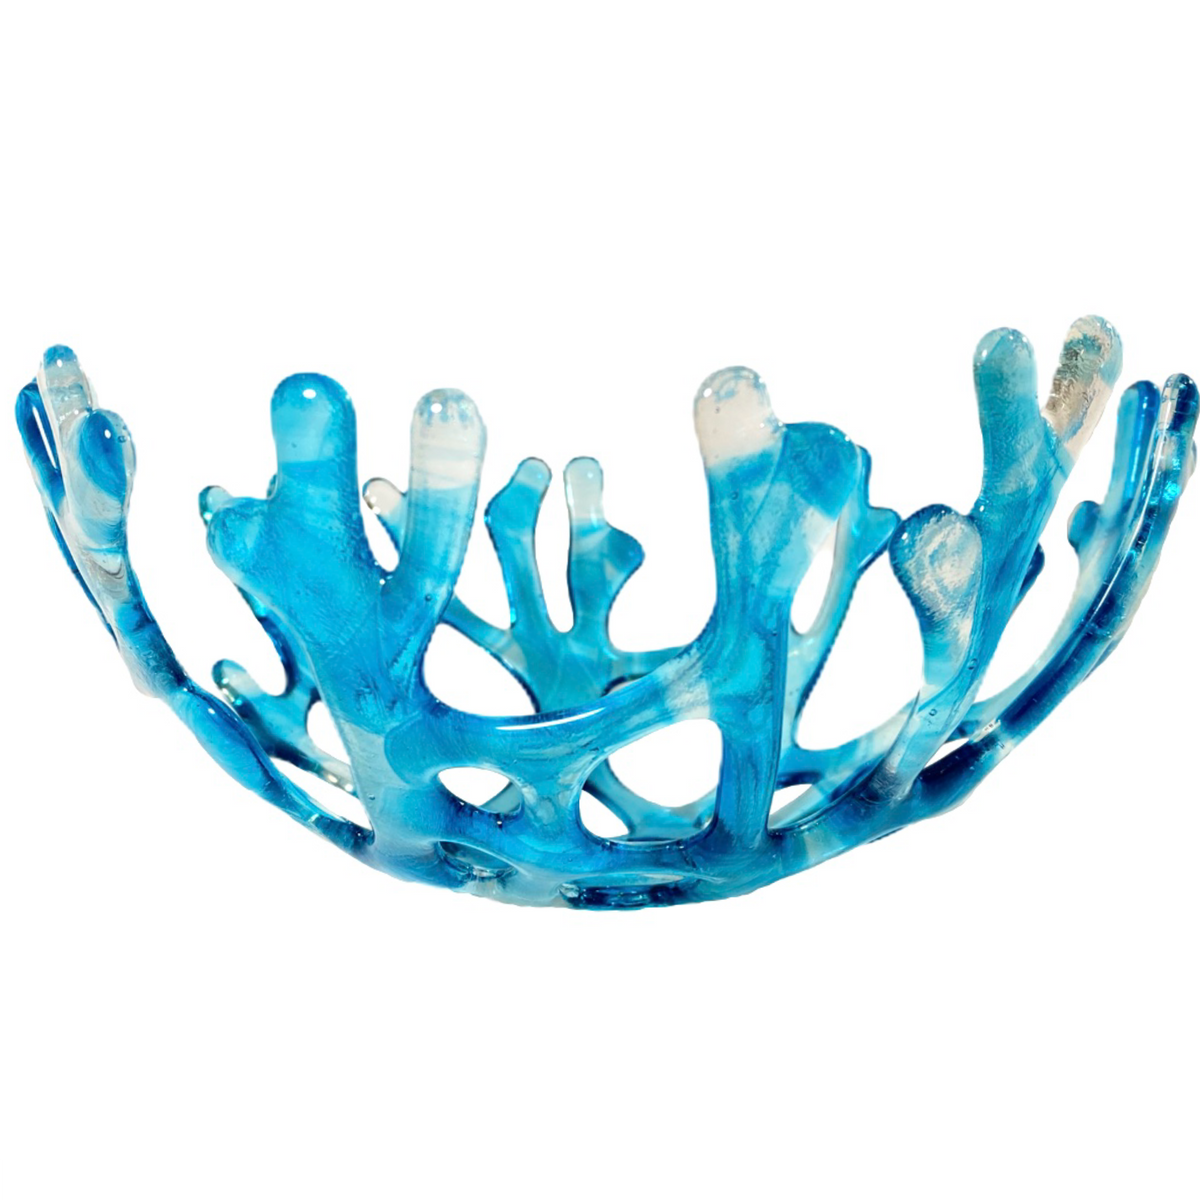 Coral Branch Bowl | Medium Aqua Blue and Clear Variegated Glass